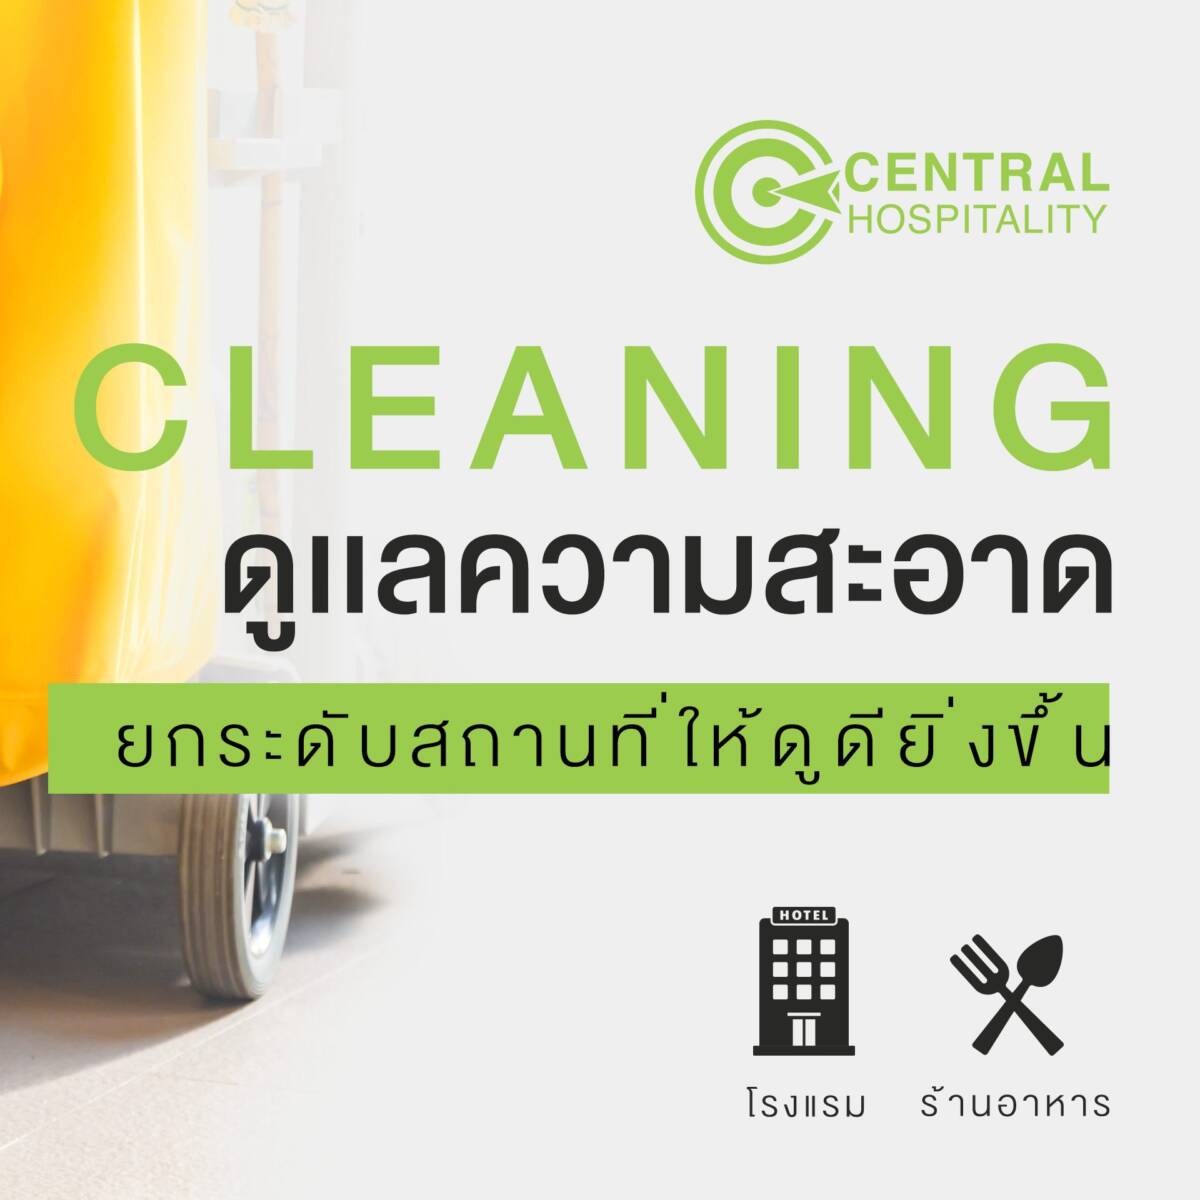 Cleaning 2